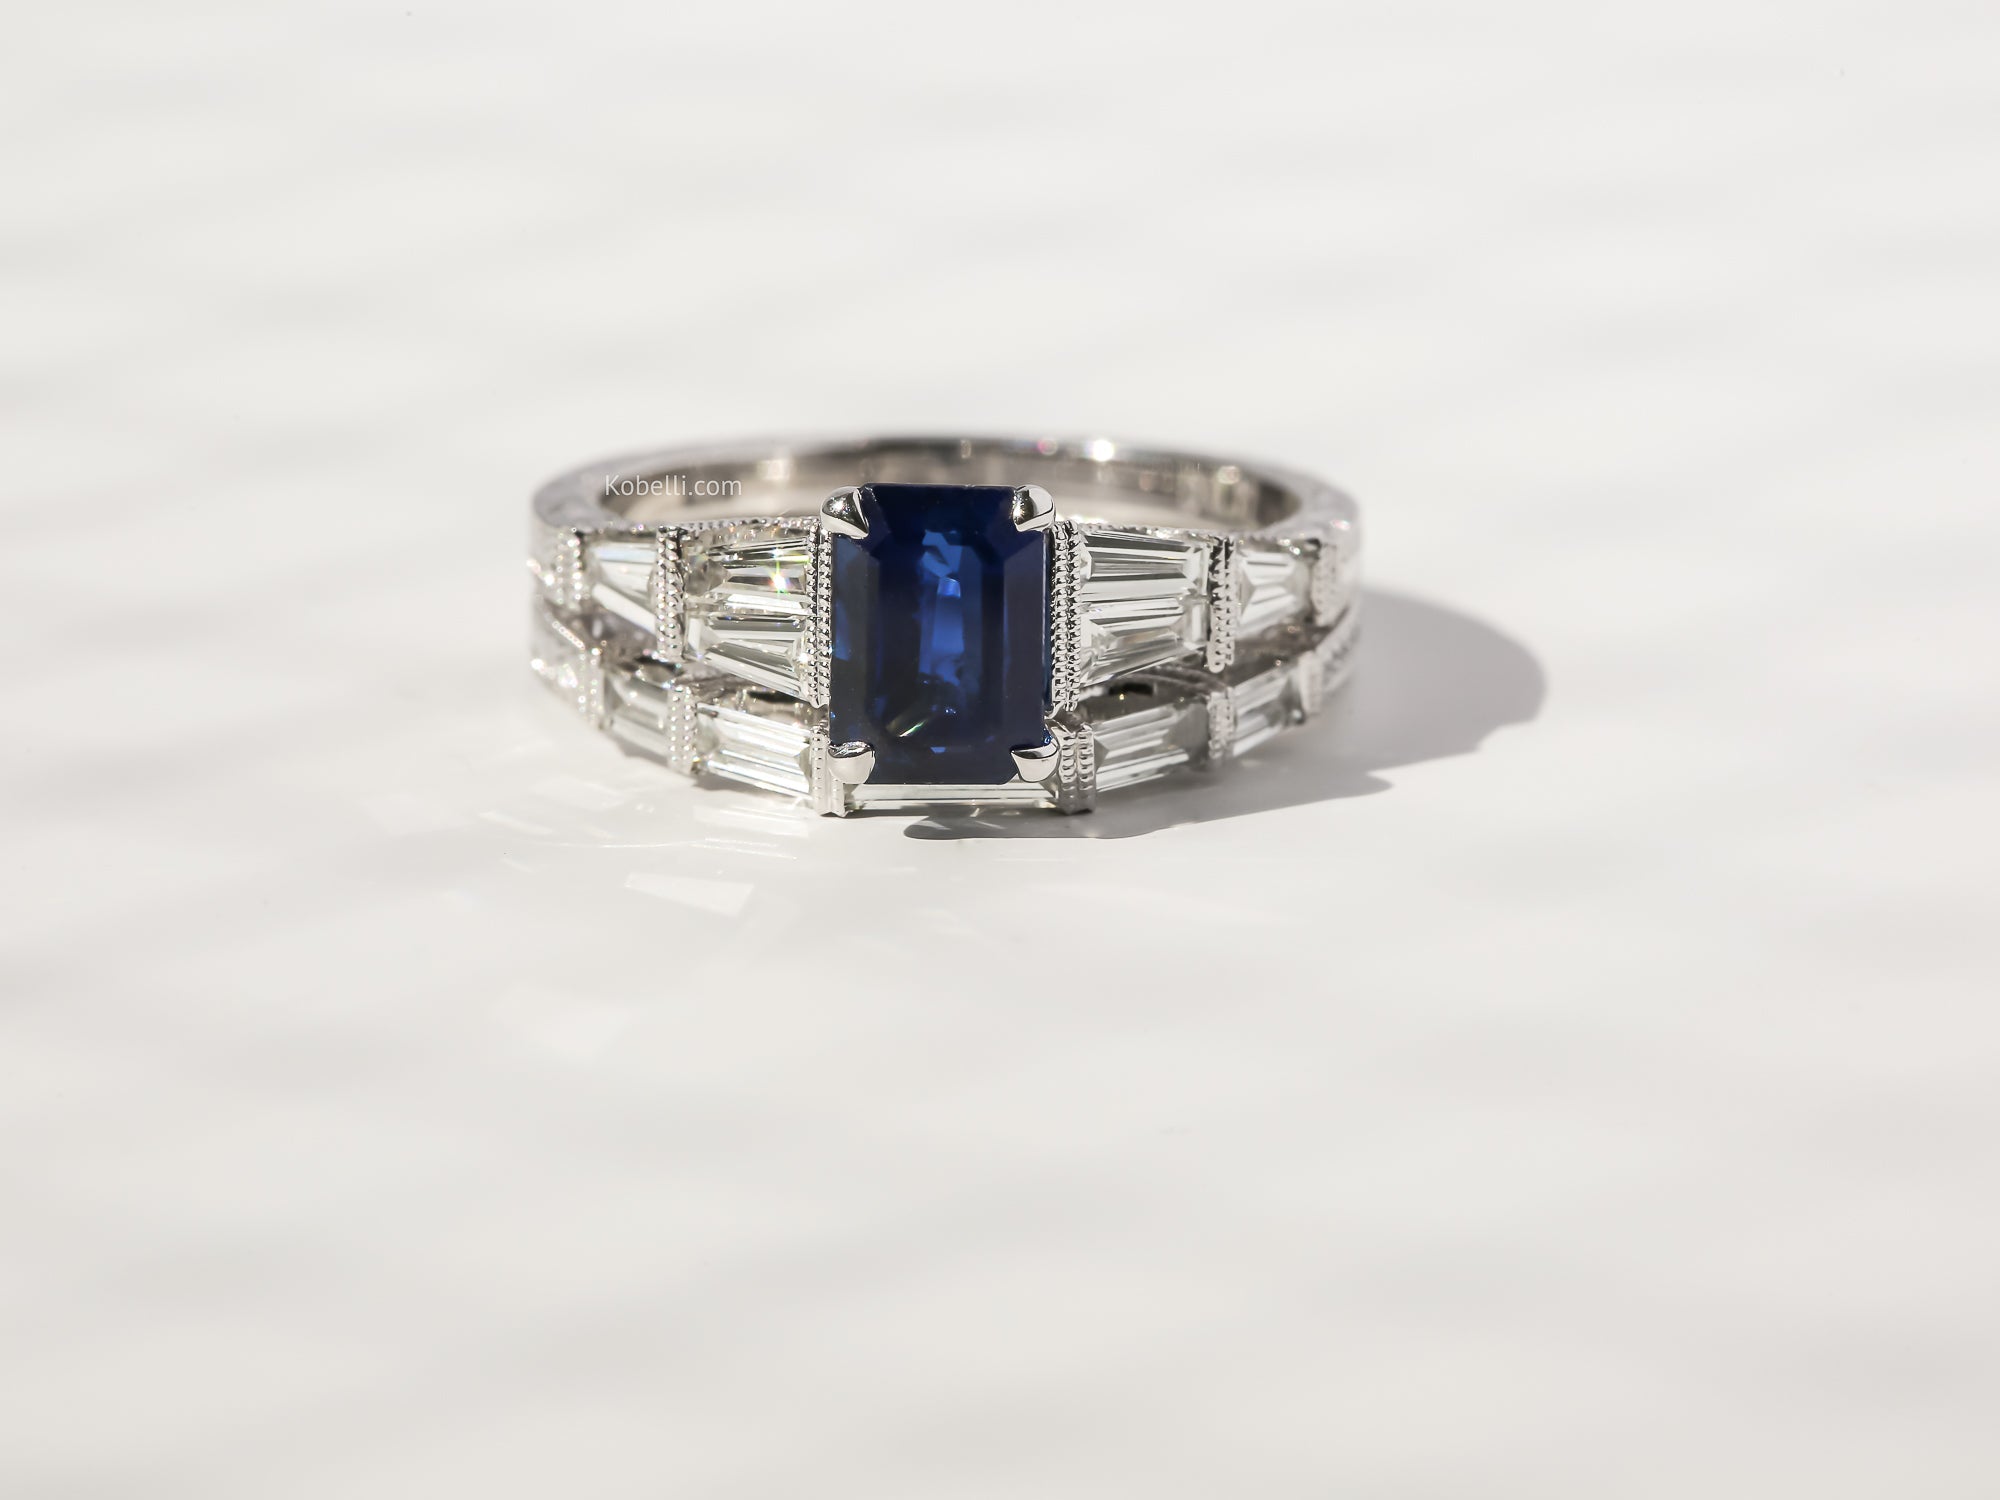 Lou Mid-Century Style Sapphire Ring with Filigree Engravings - Size 6.5